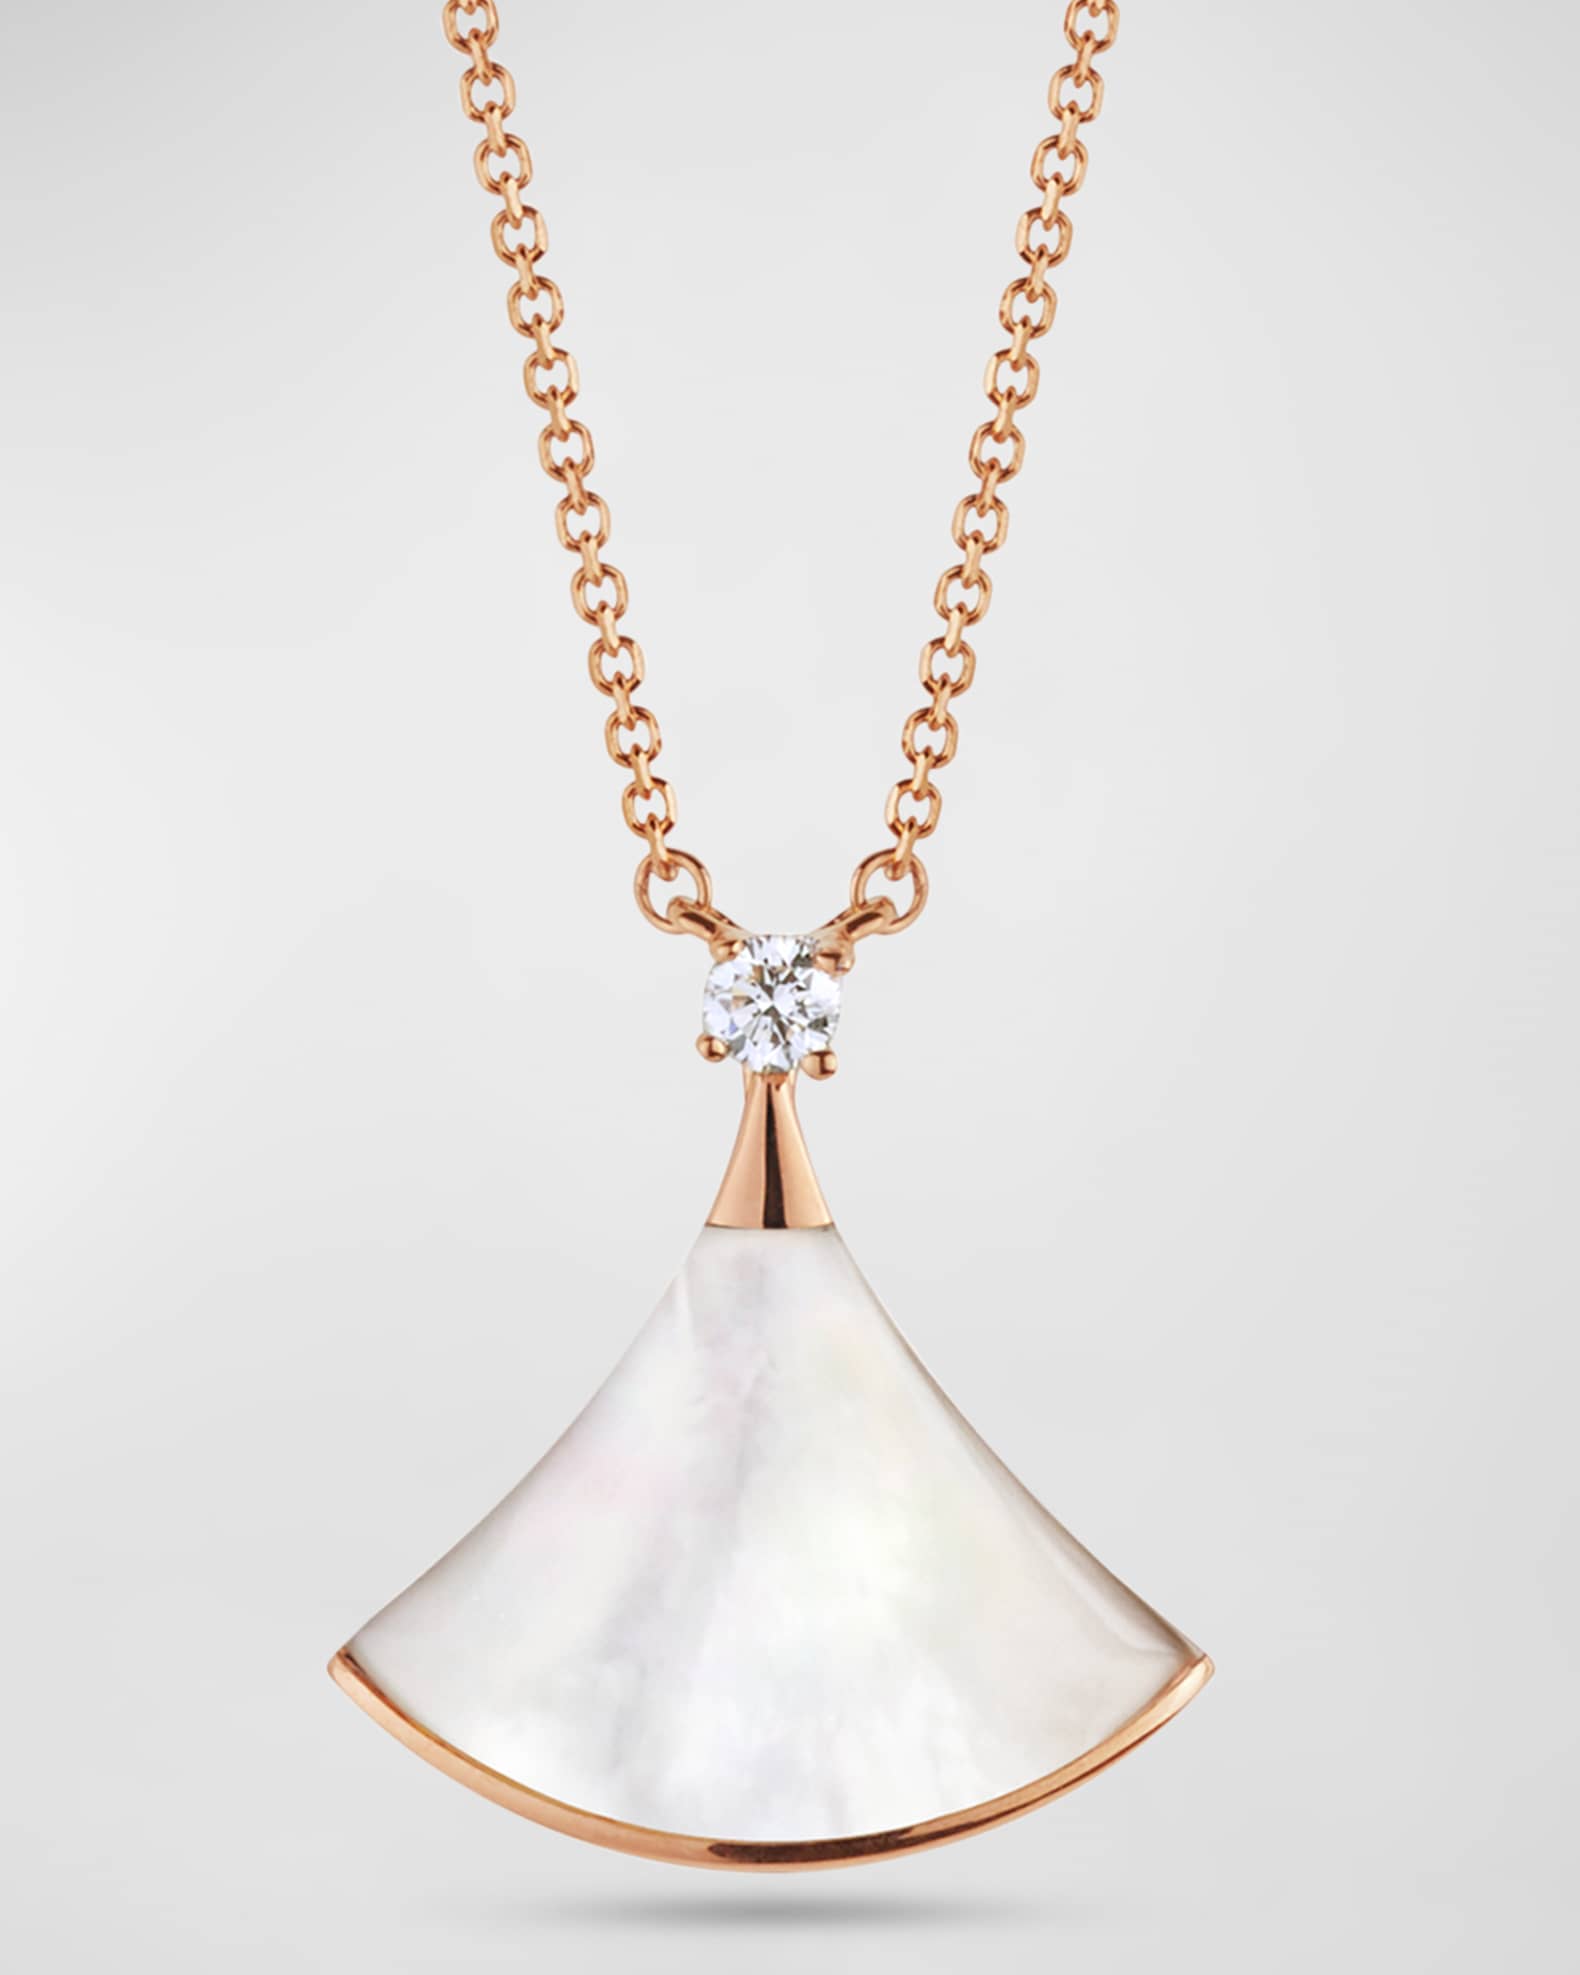 Bvlgari Diva's Dream mother of pearl necklace